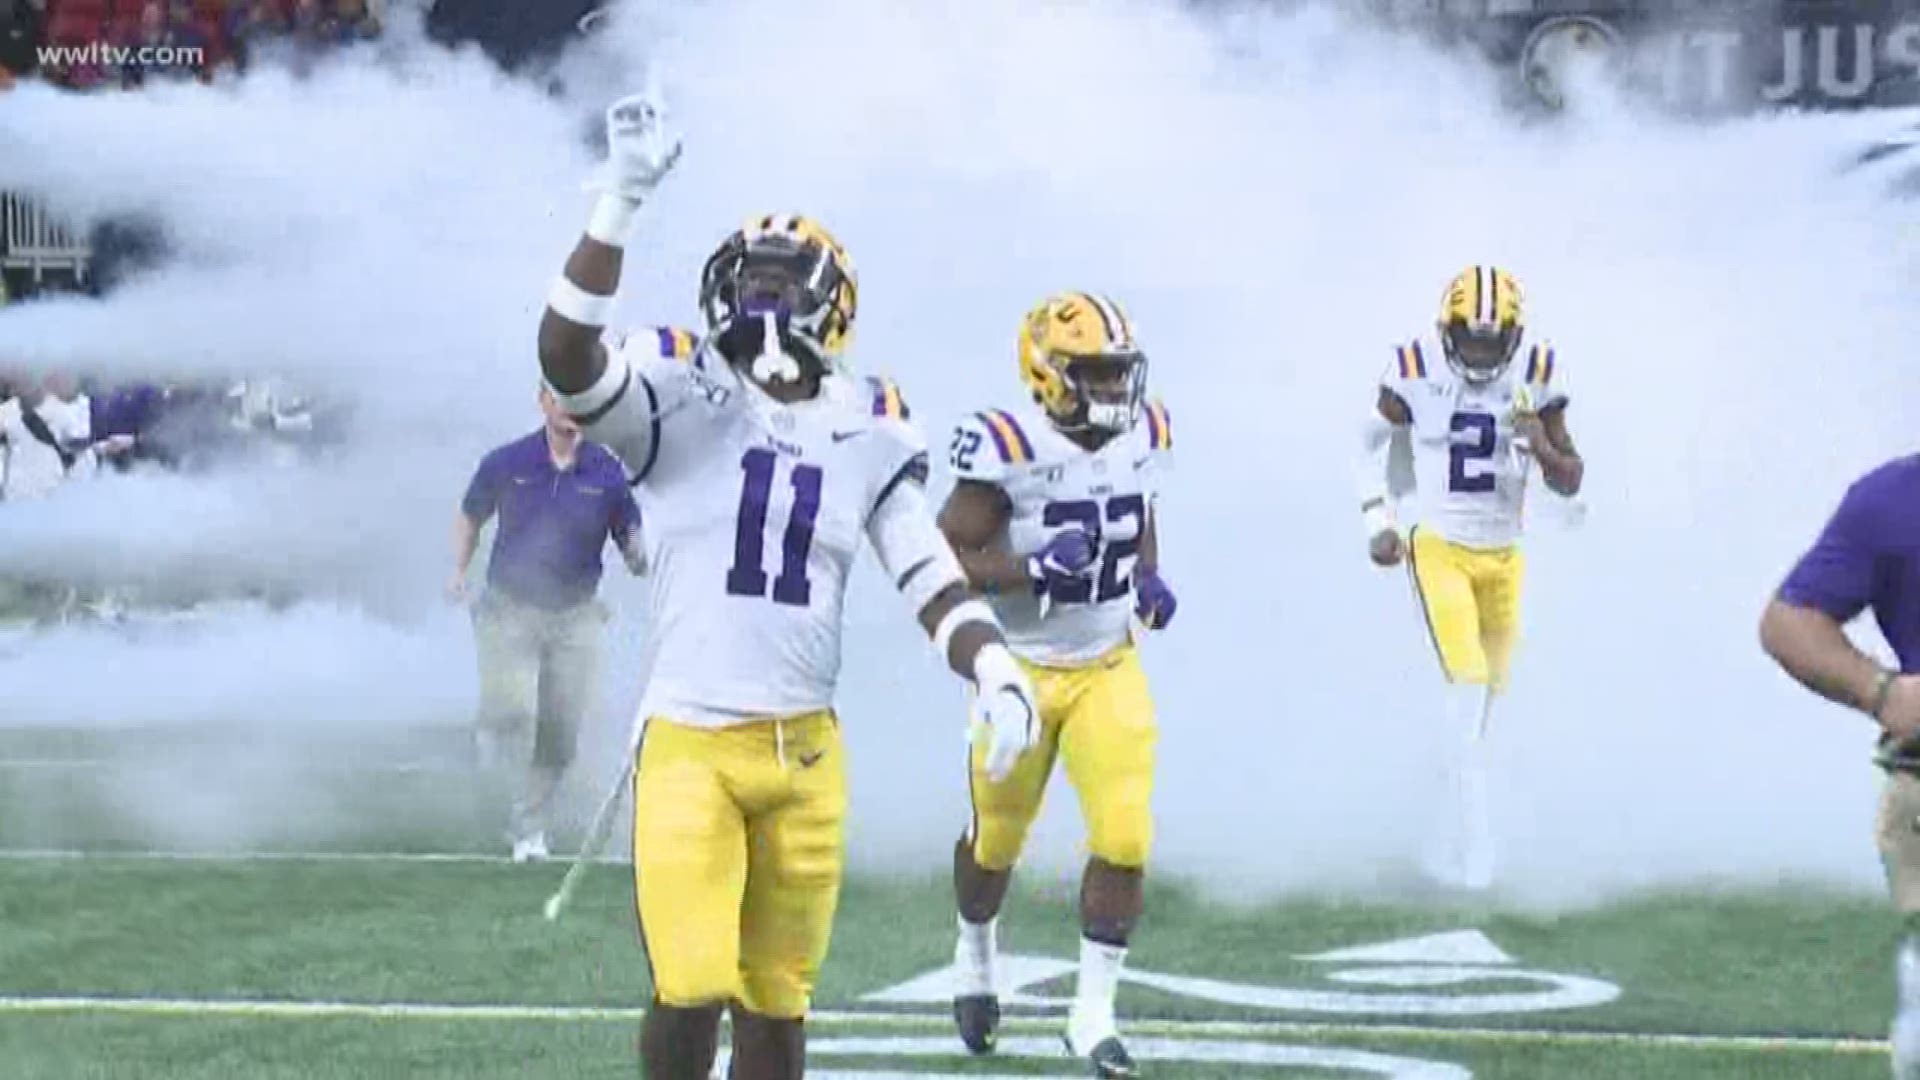 According to WBRZ, the LSU athletic department has 13,000 tickets to sell but received 16,000 requests to purchase them.